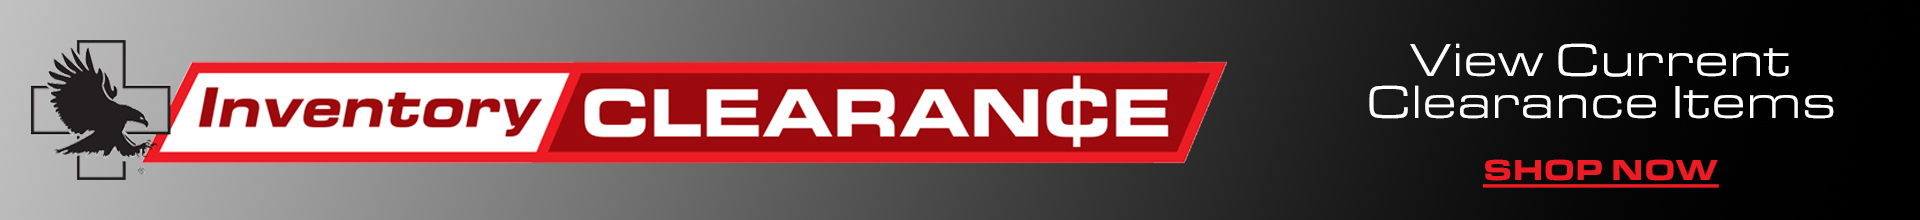 Clearance Page Banner